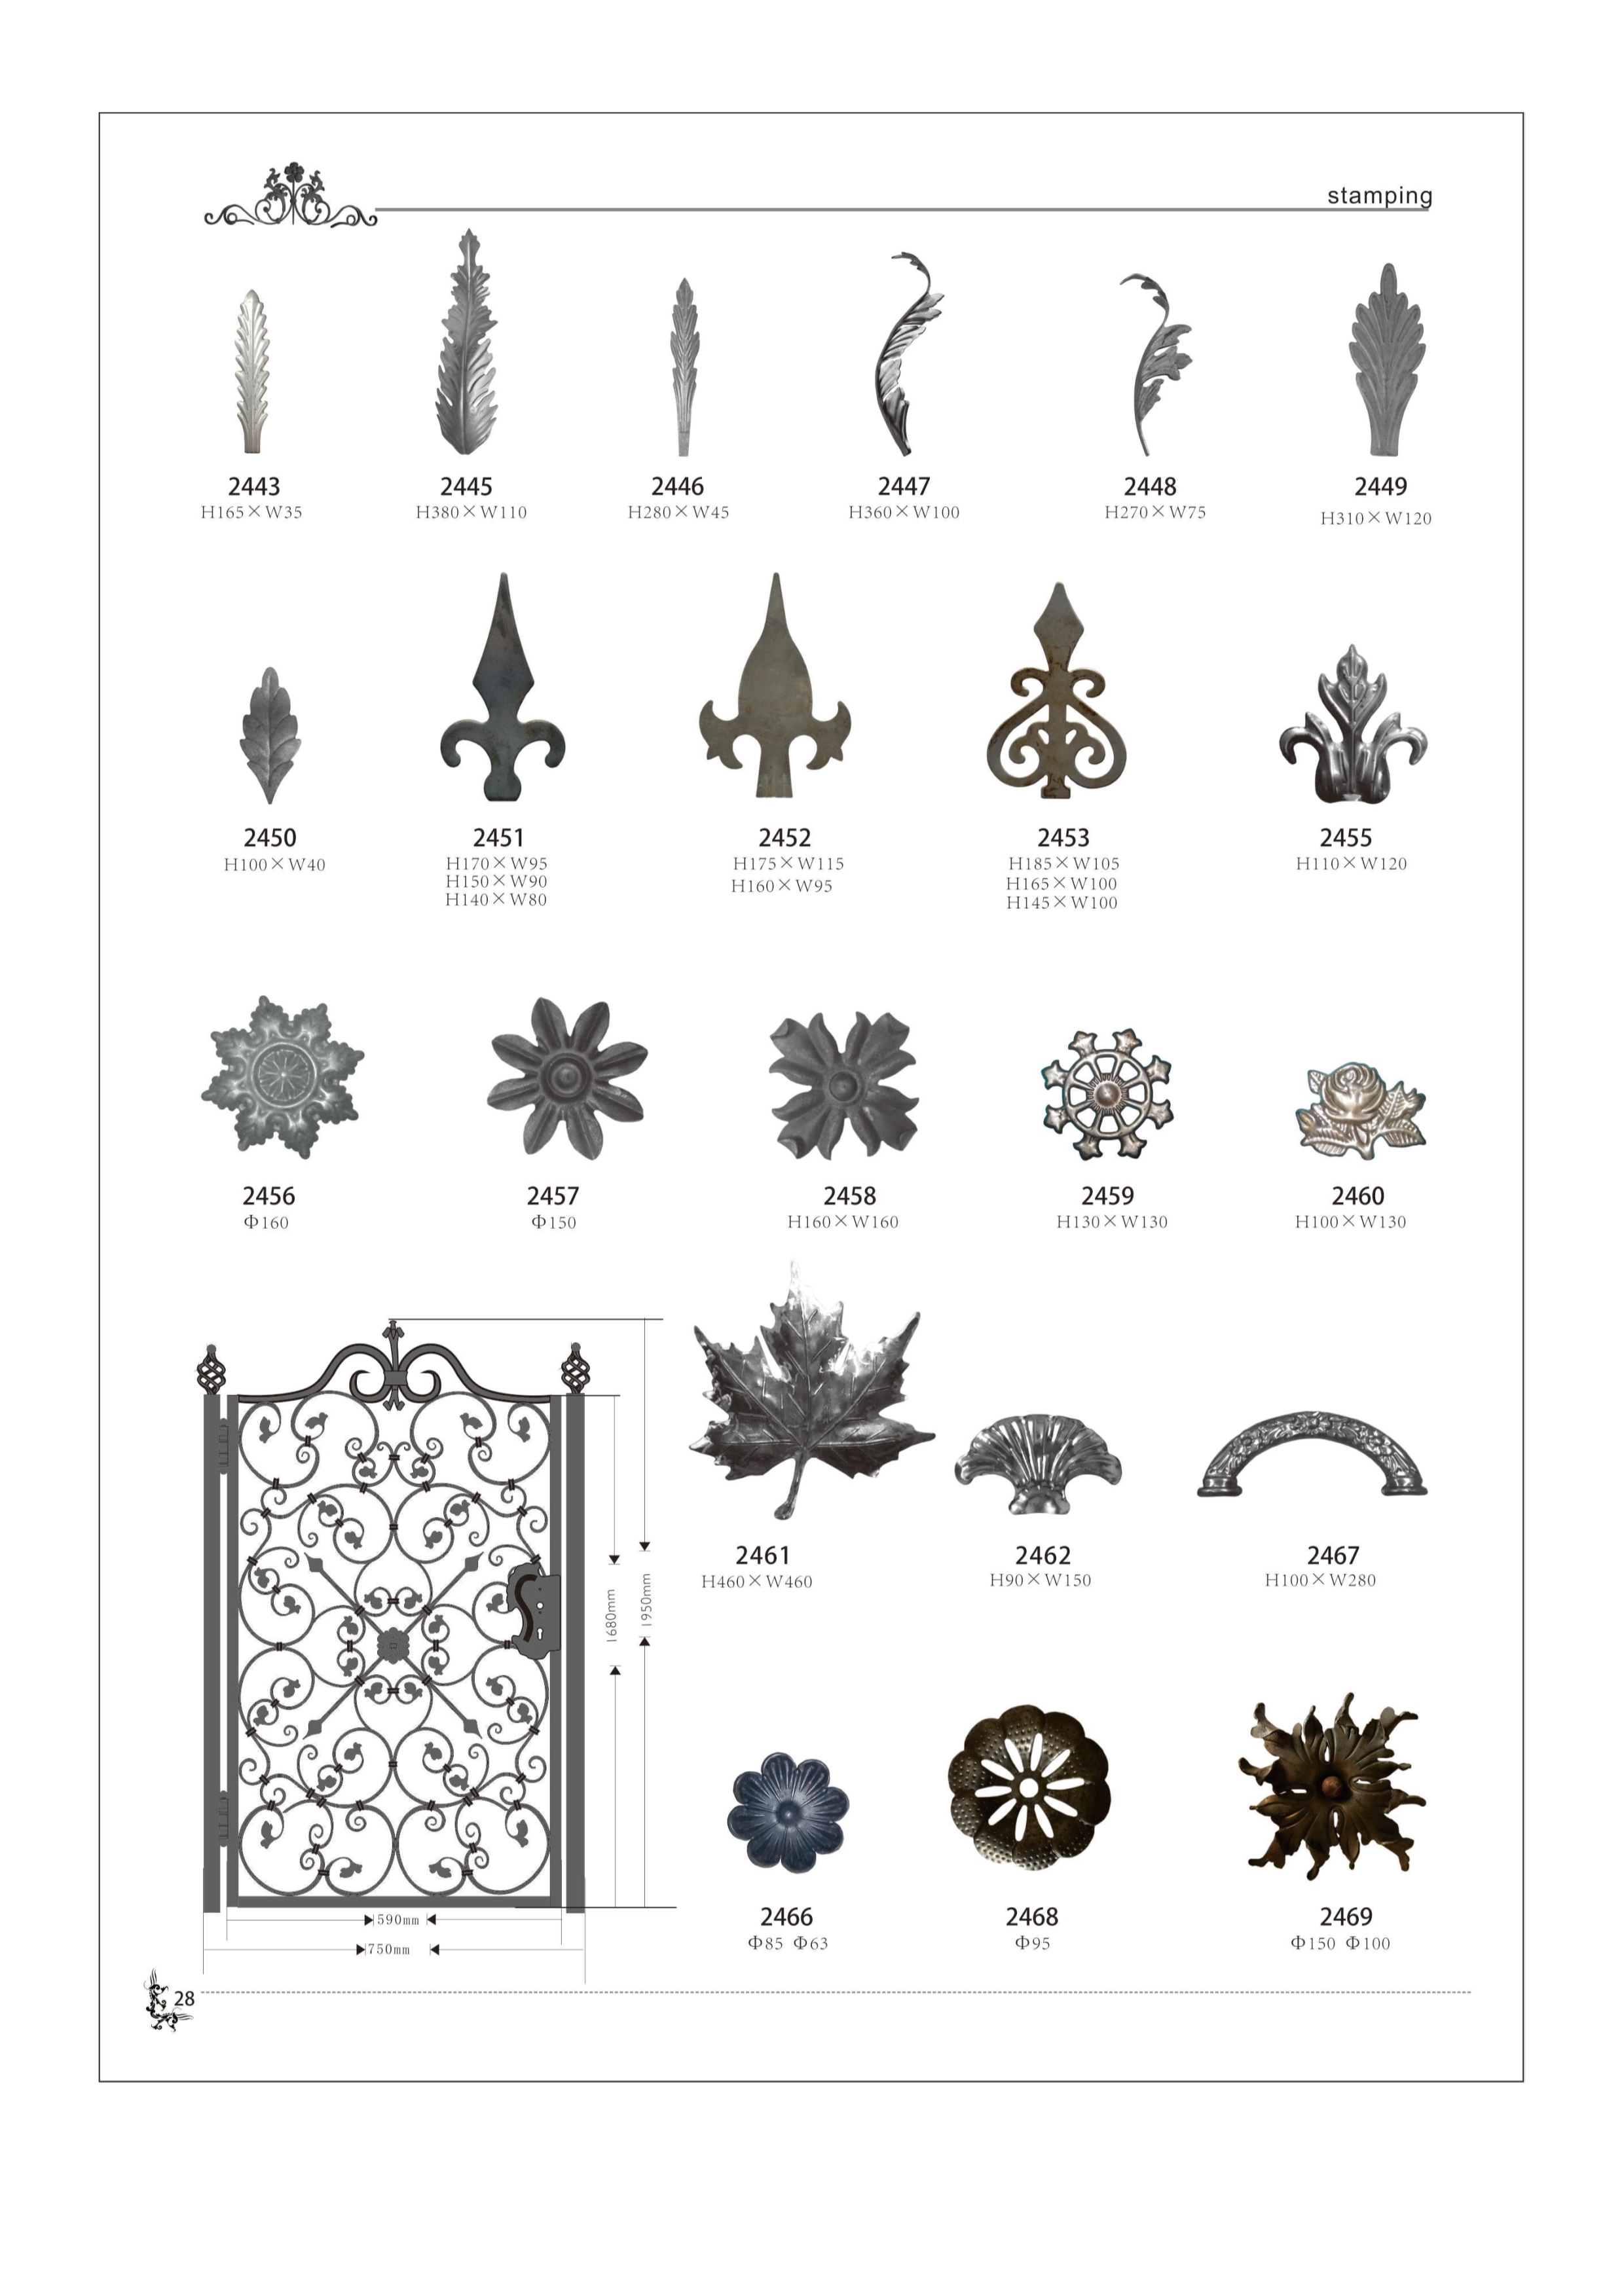 stamping ornaments Featured Image